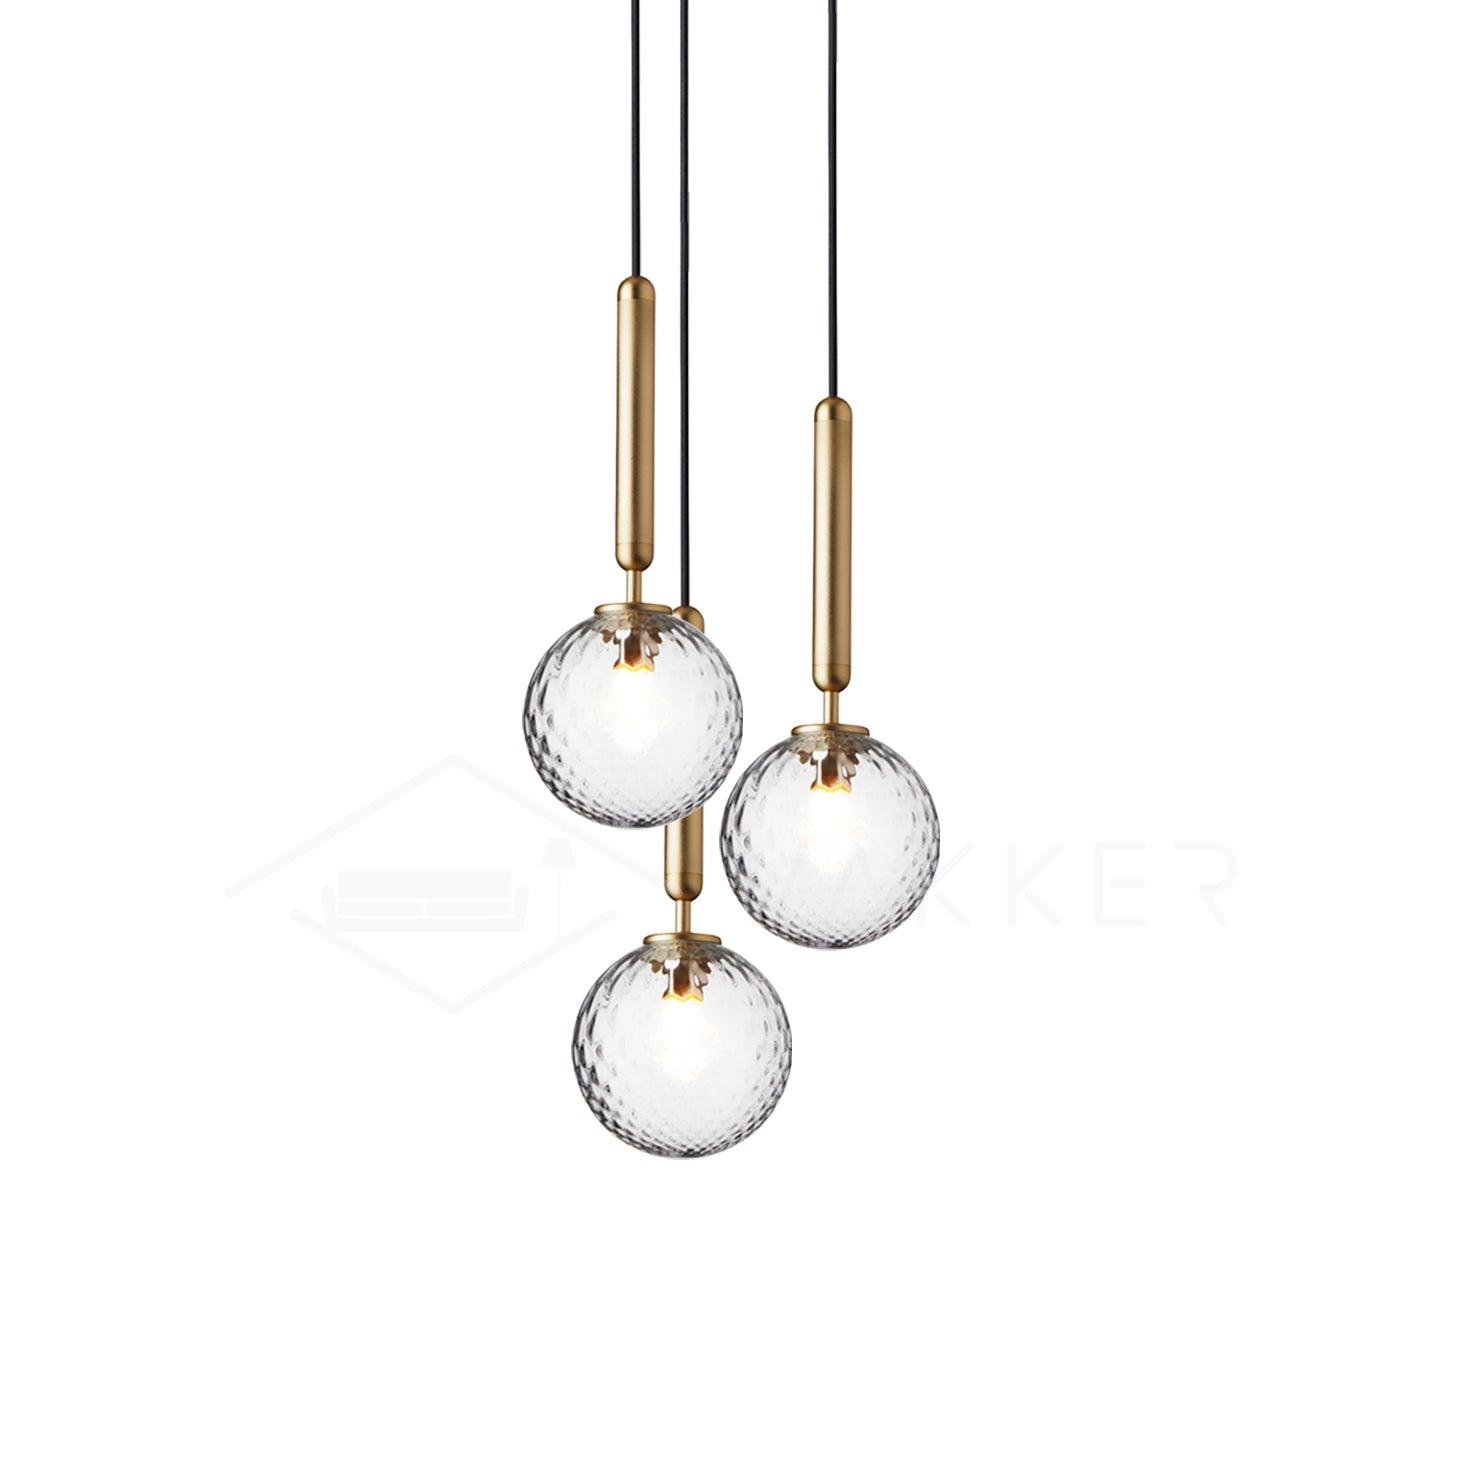 Brass Pendant Light with 3 Heads - Diameter 7.9 inches x Height 59 inches (20cm x 150cm) - Made of Brass with Clear Finish.